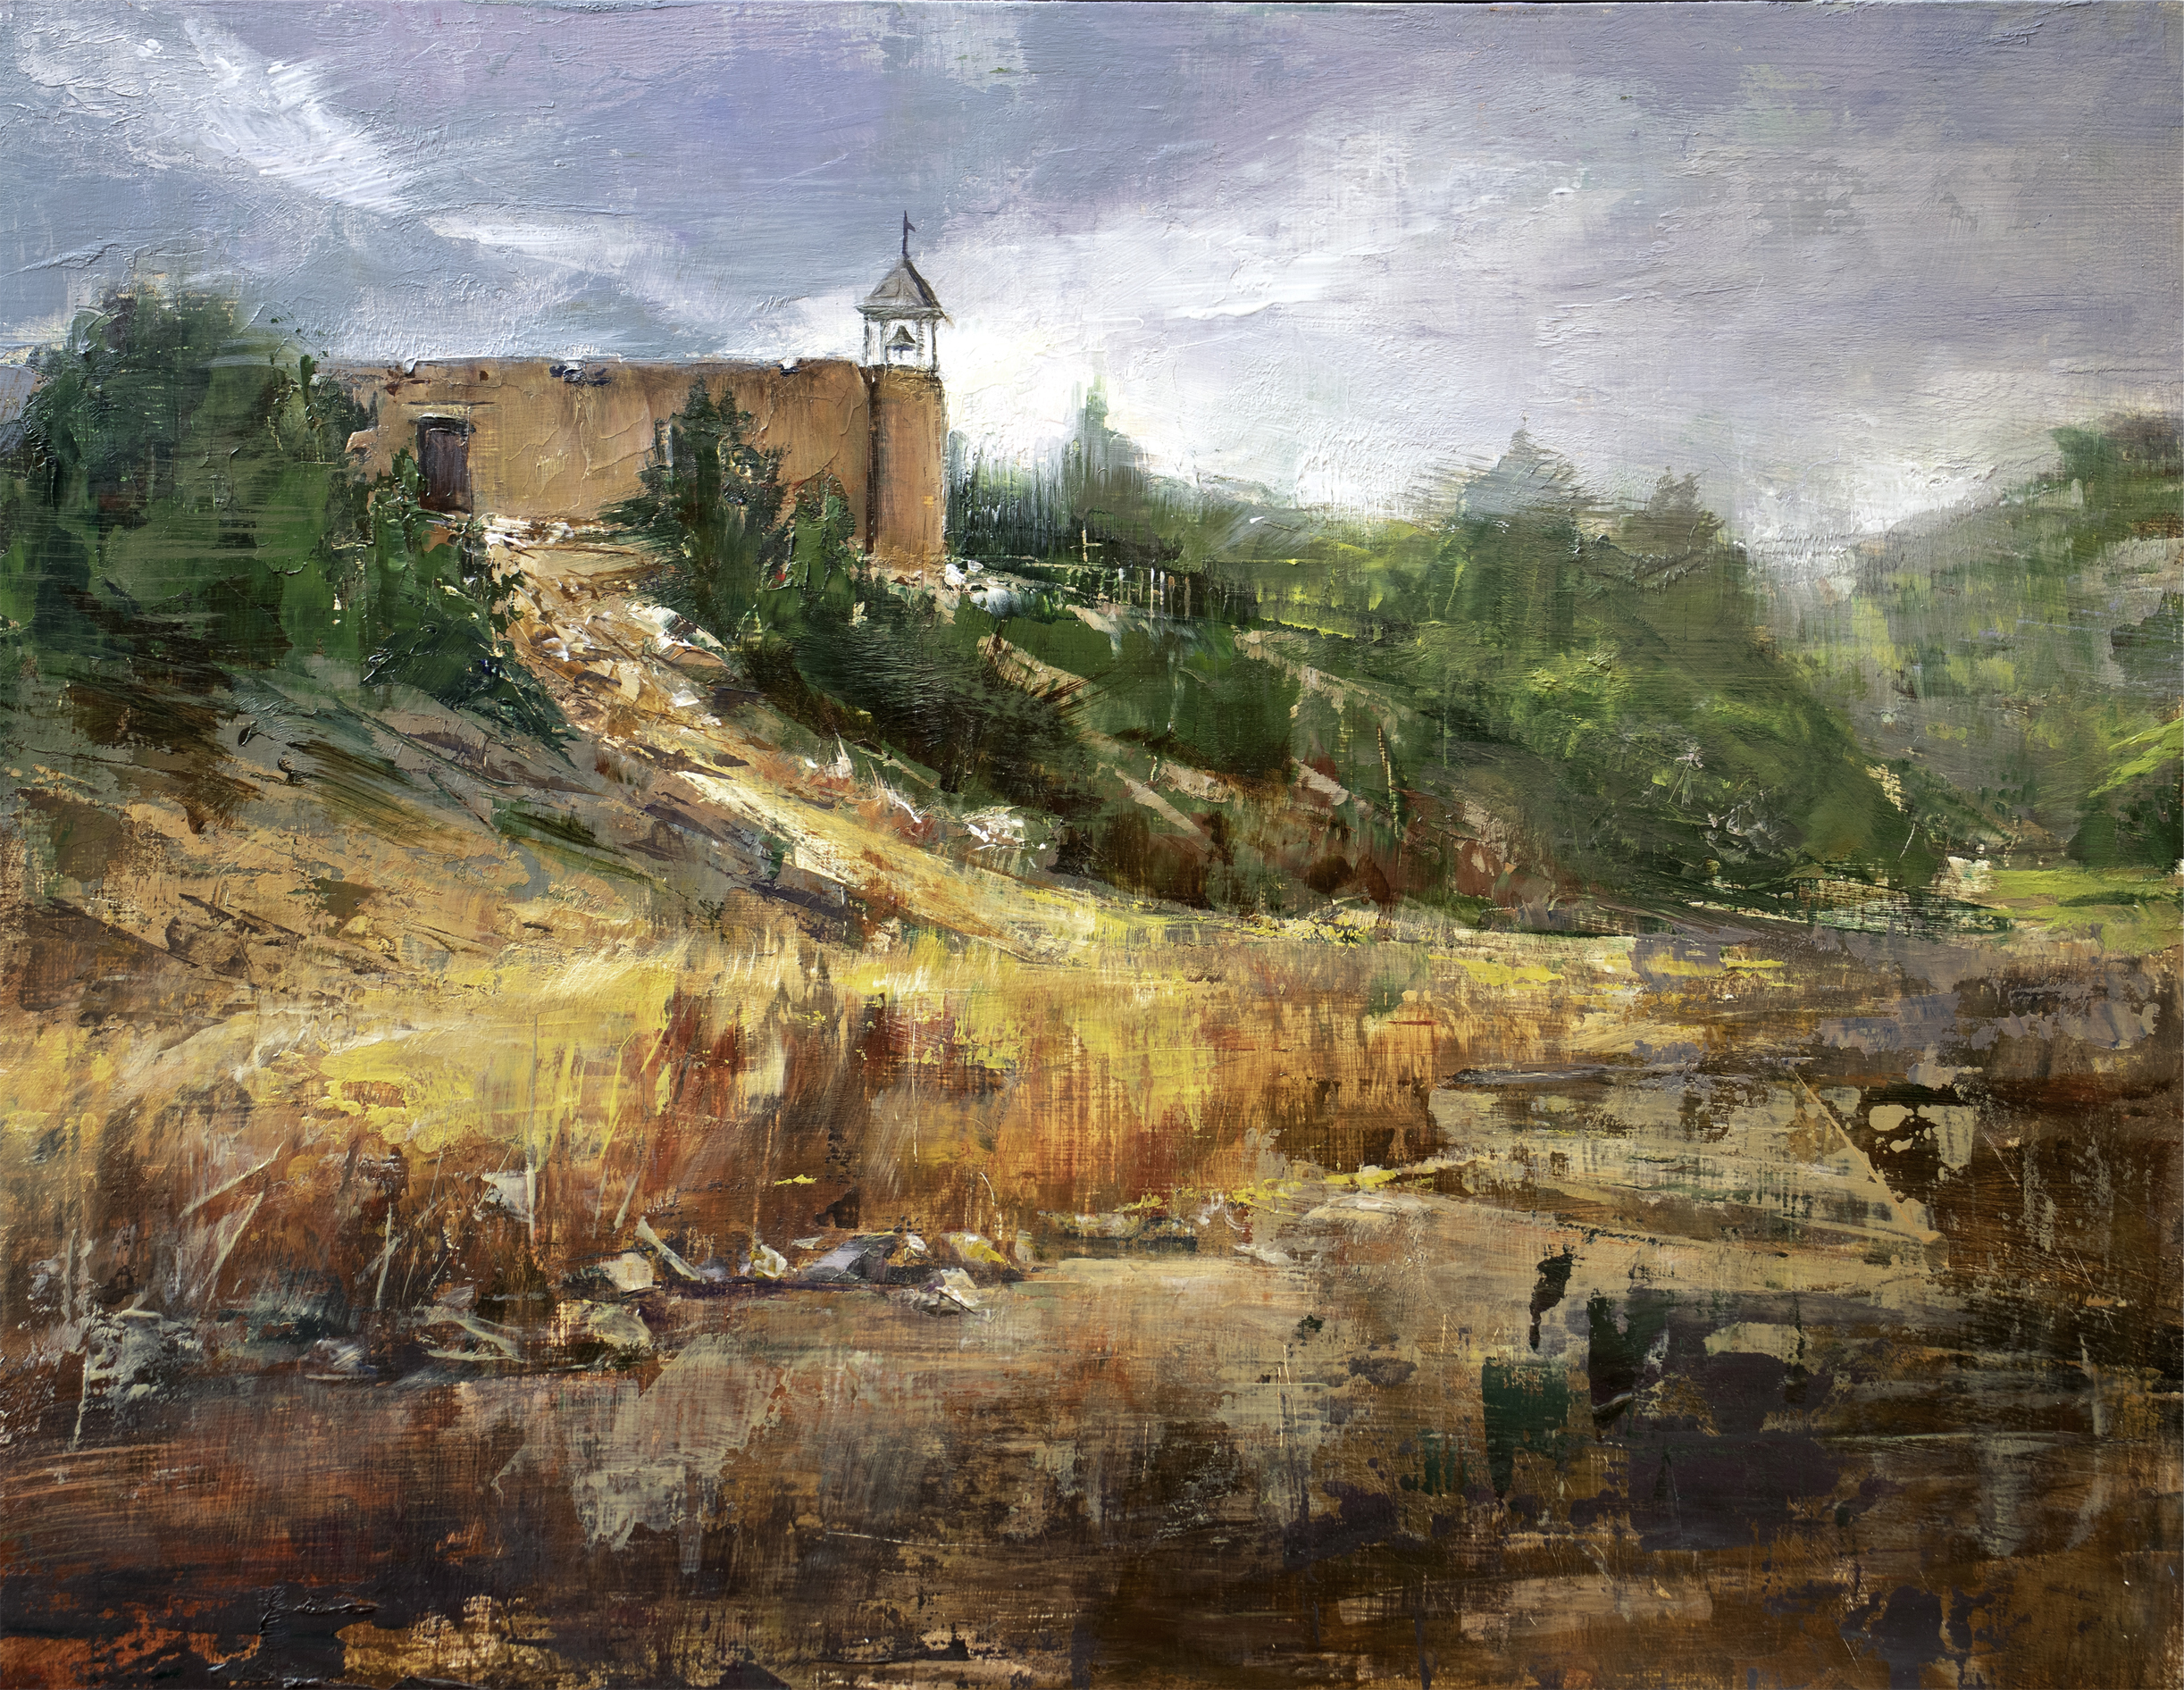 Landscape painting - Michele Byrne, "Morning at the Morado," 14 x 18 in.